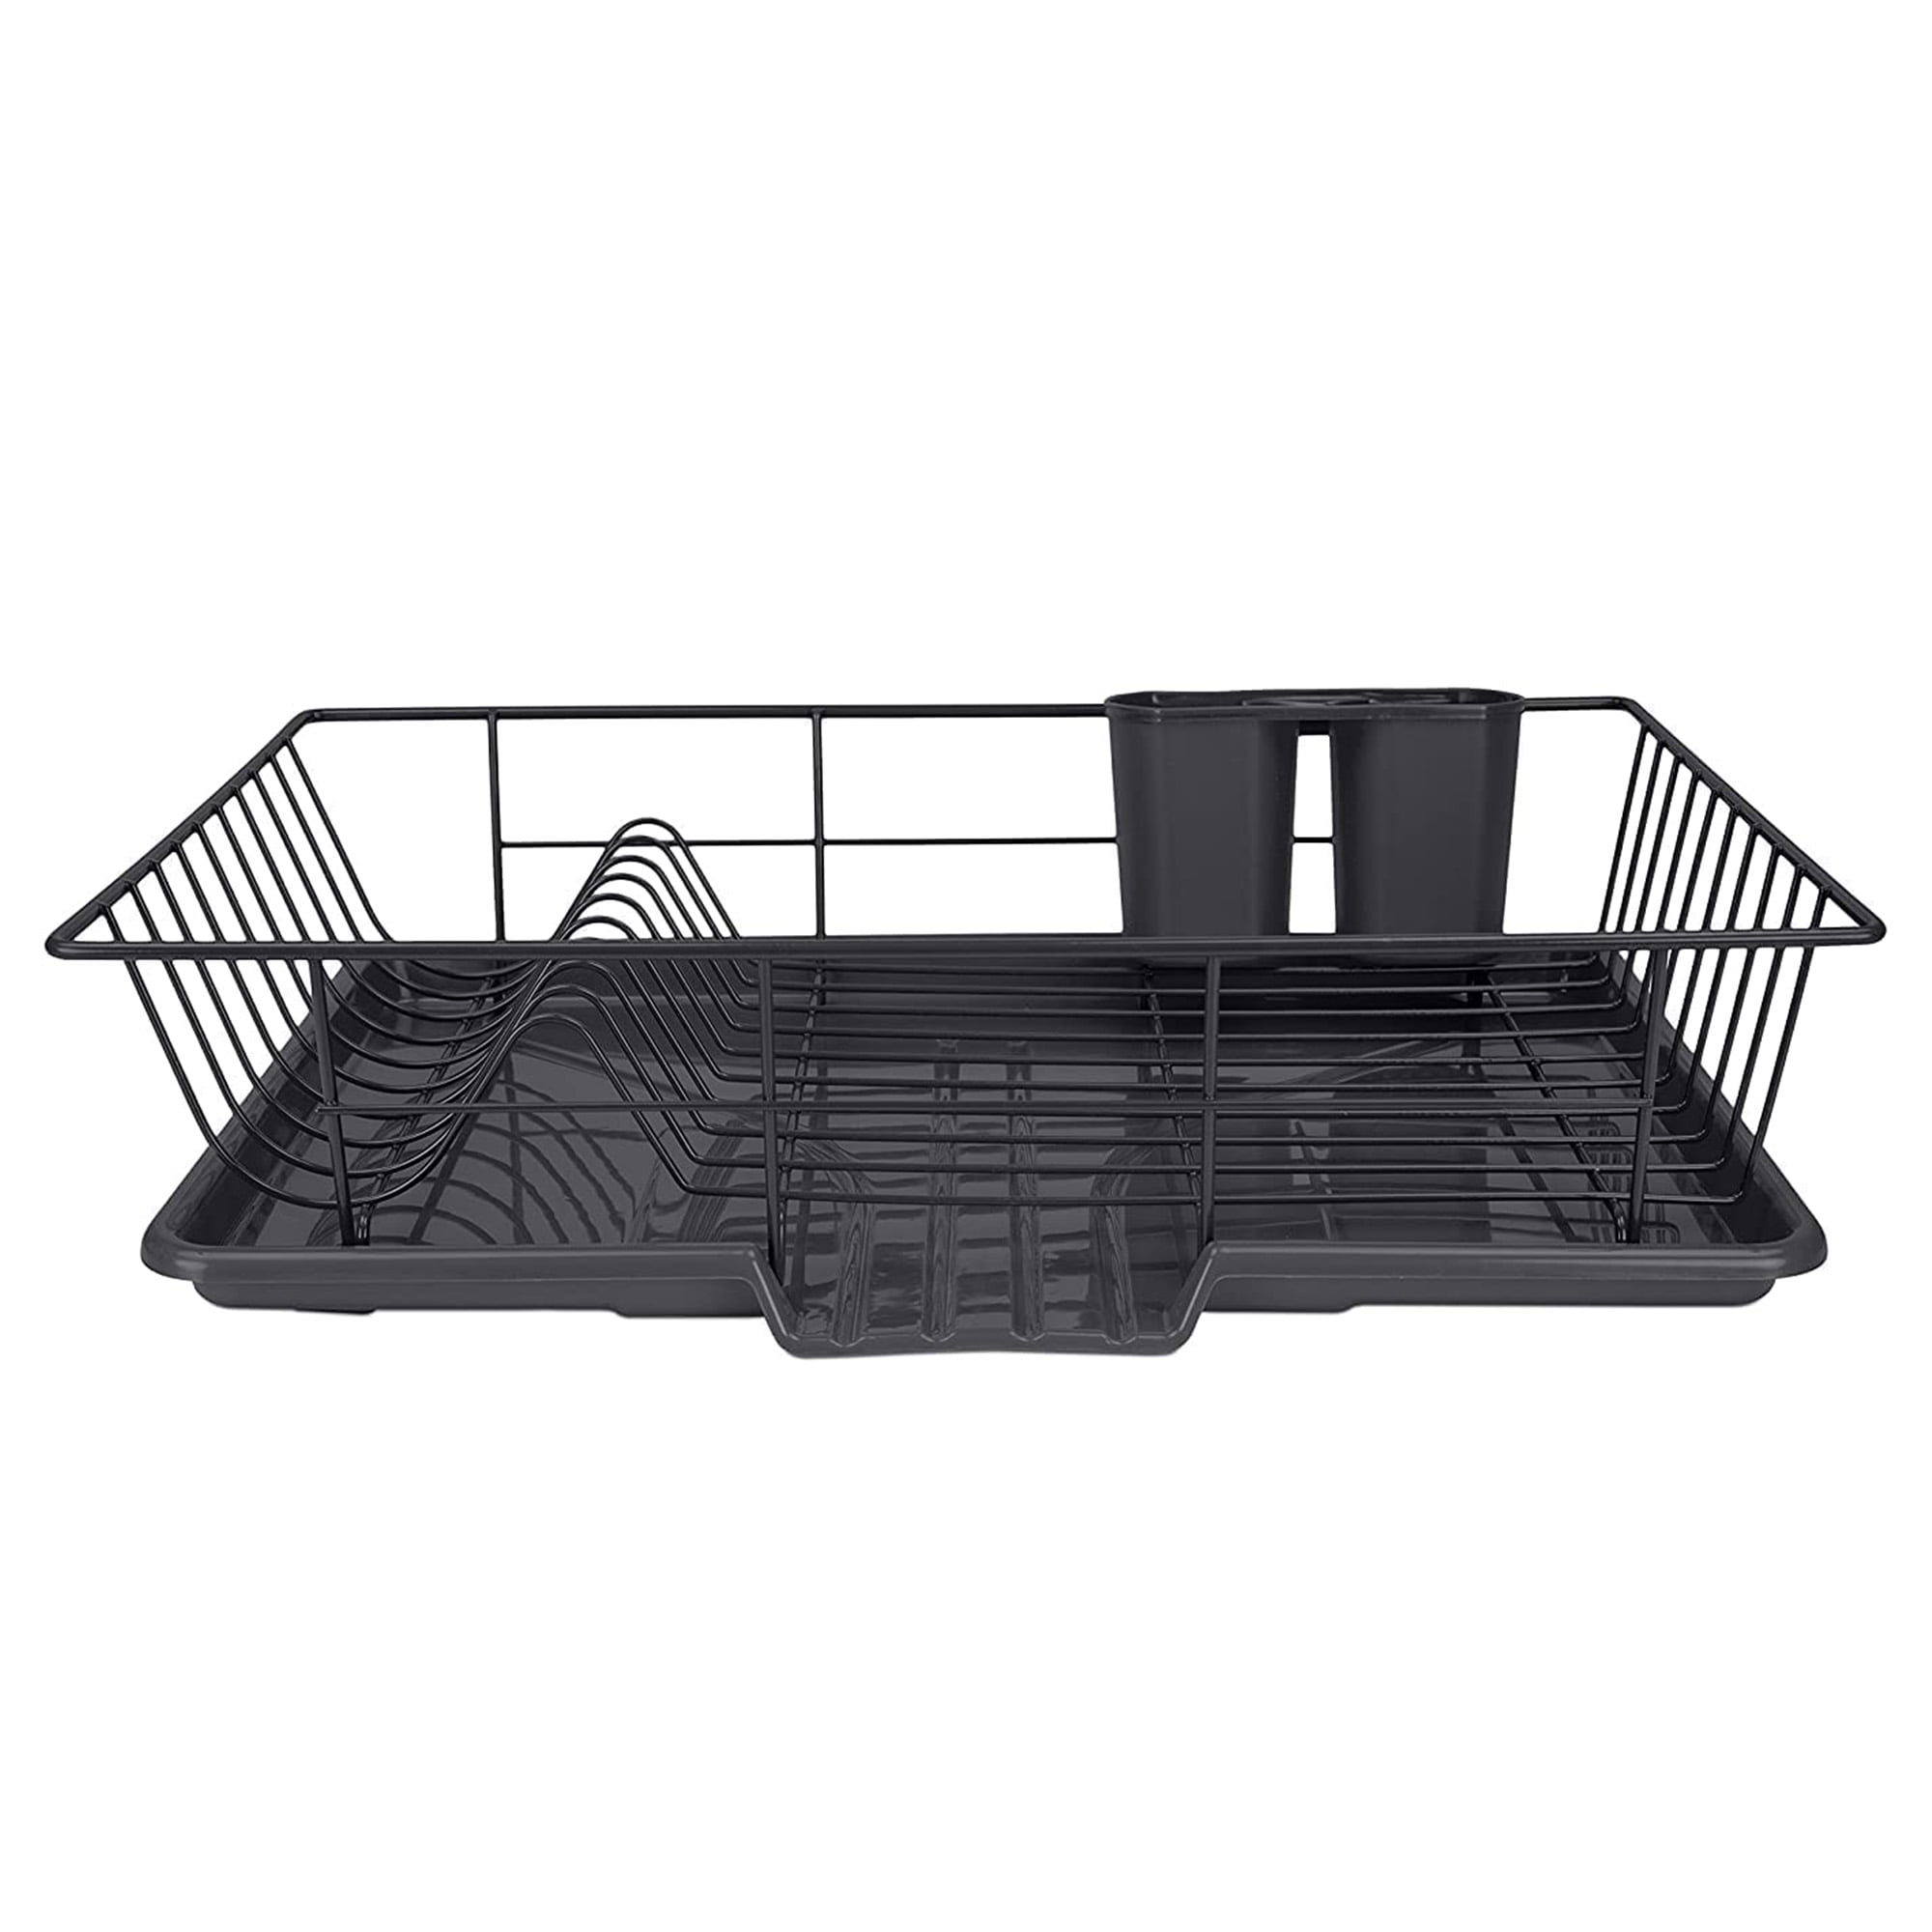  ORZ Dish Drying Rack, Dish Racks for Kitchen Counter, Small  Black Metal Dish Drainer, Compact Dish Drying Rack with Drainboard, Kitchen  Drying Rack for Dishes (Black 1 Tier)